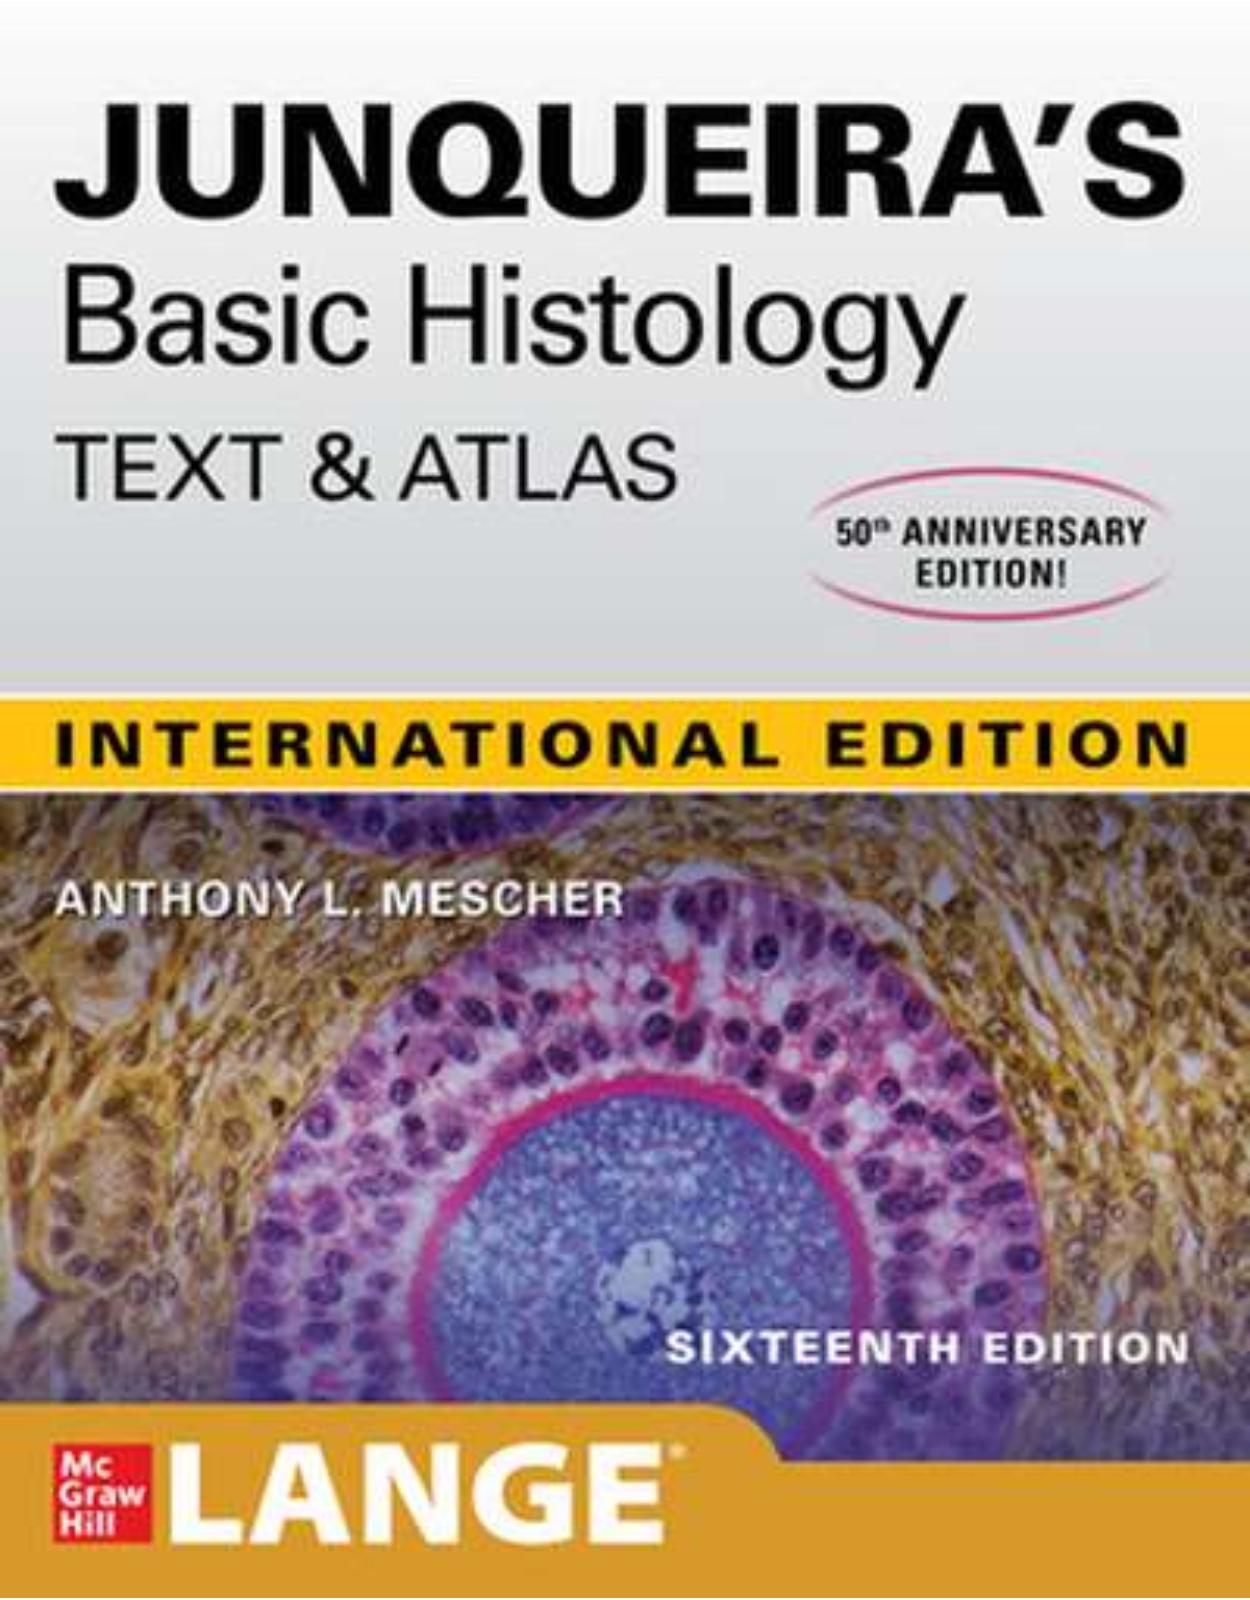 Junqueira’s Basic Histology: Text And Atlas, Sixteenth Edition